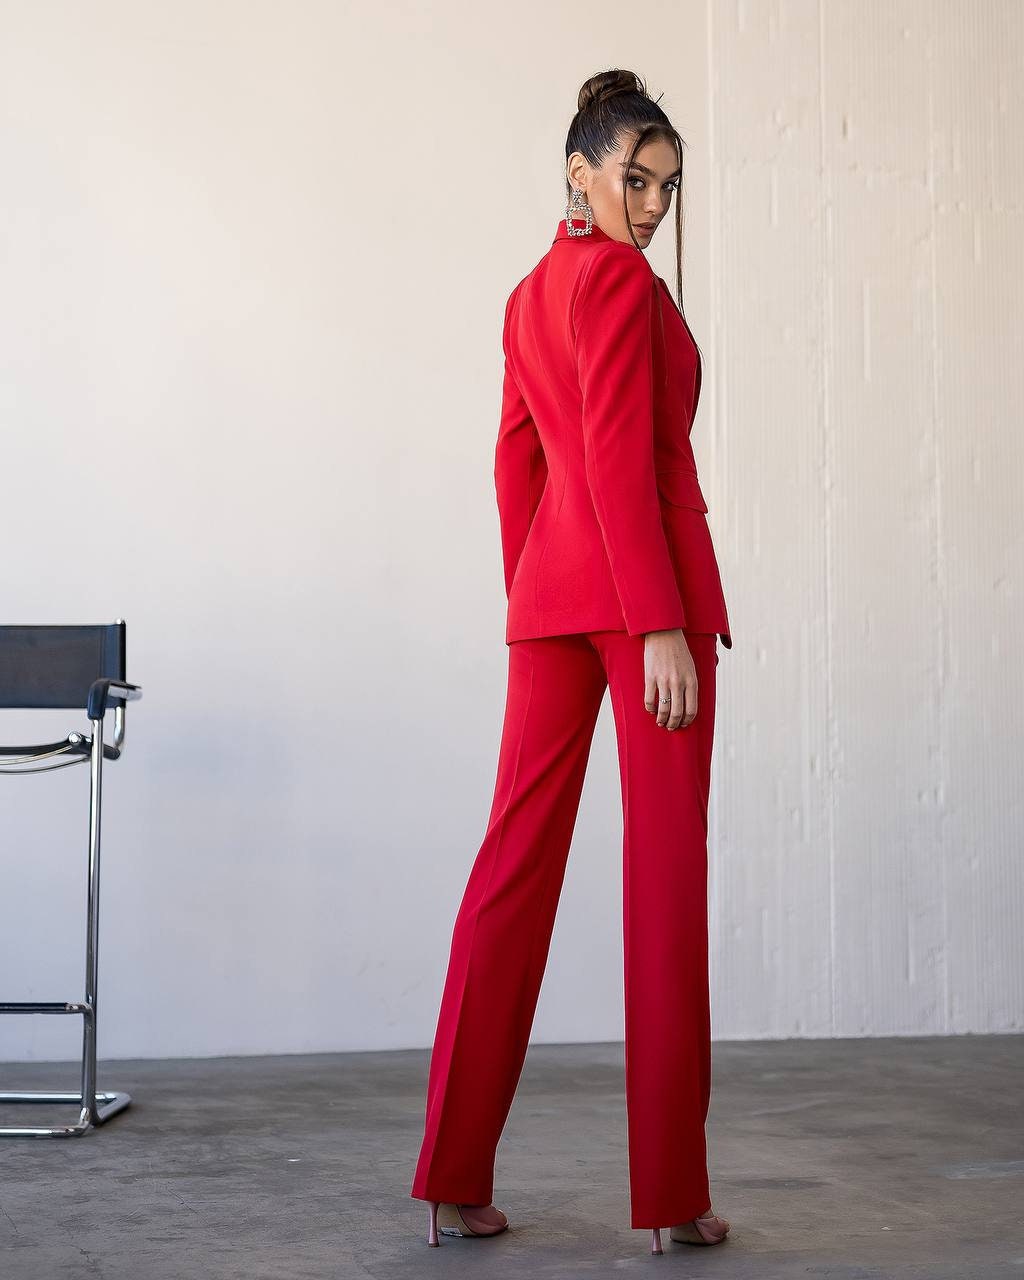 Red Formal Pantsuit for Women, Red Pants Suit for Office, Business Suit  Womens, Red Blazer Trouser Suit for Women 